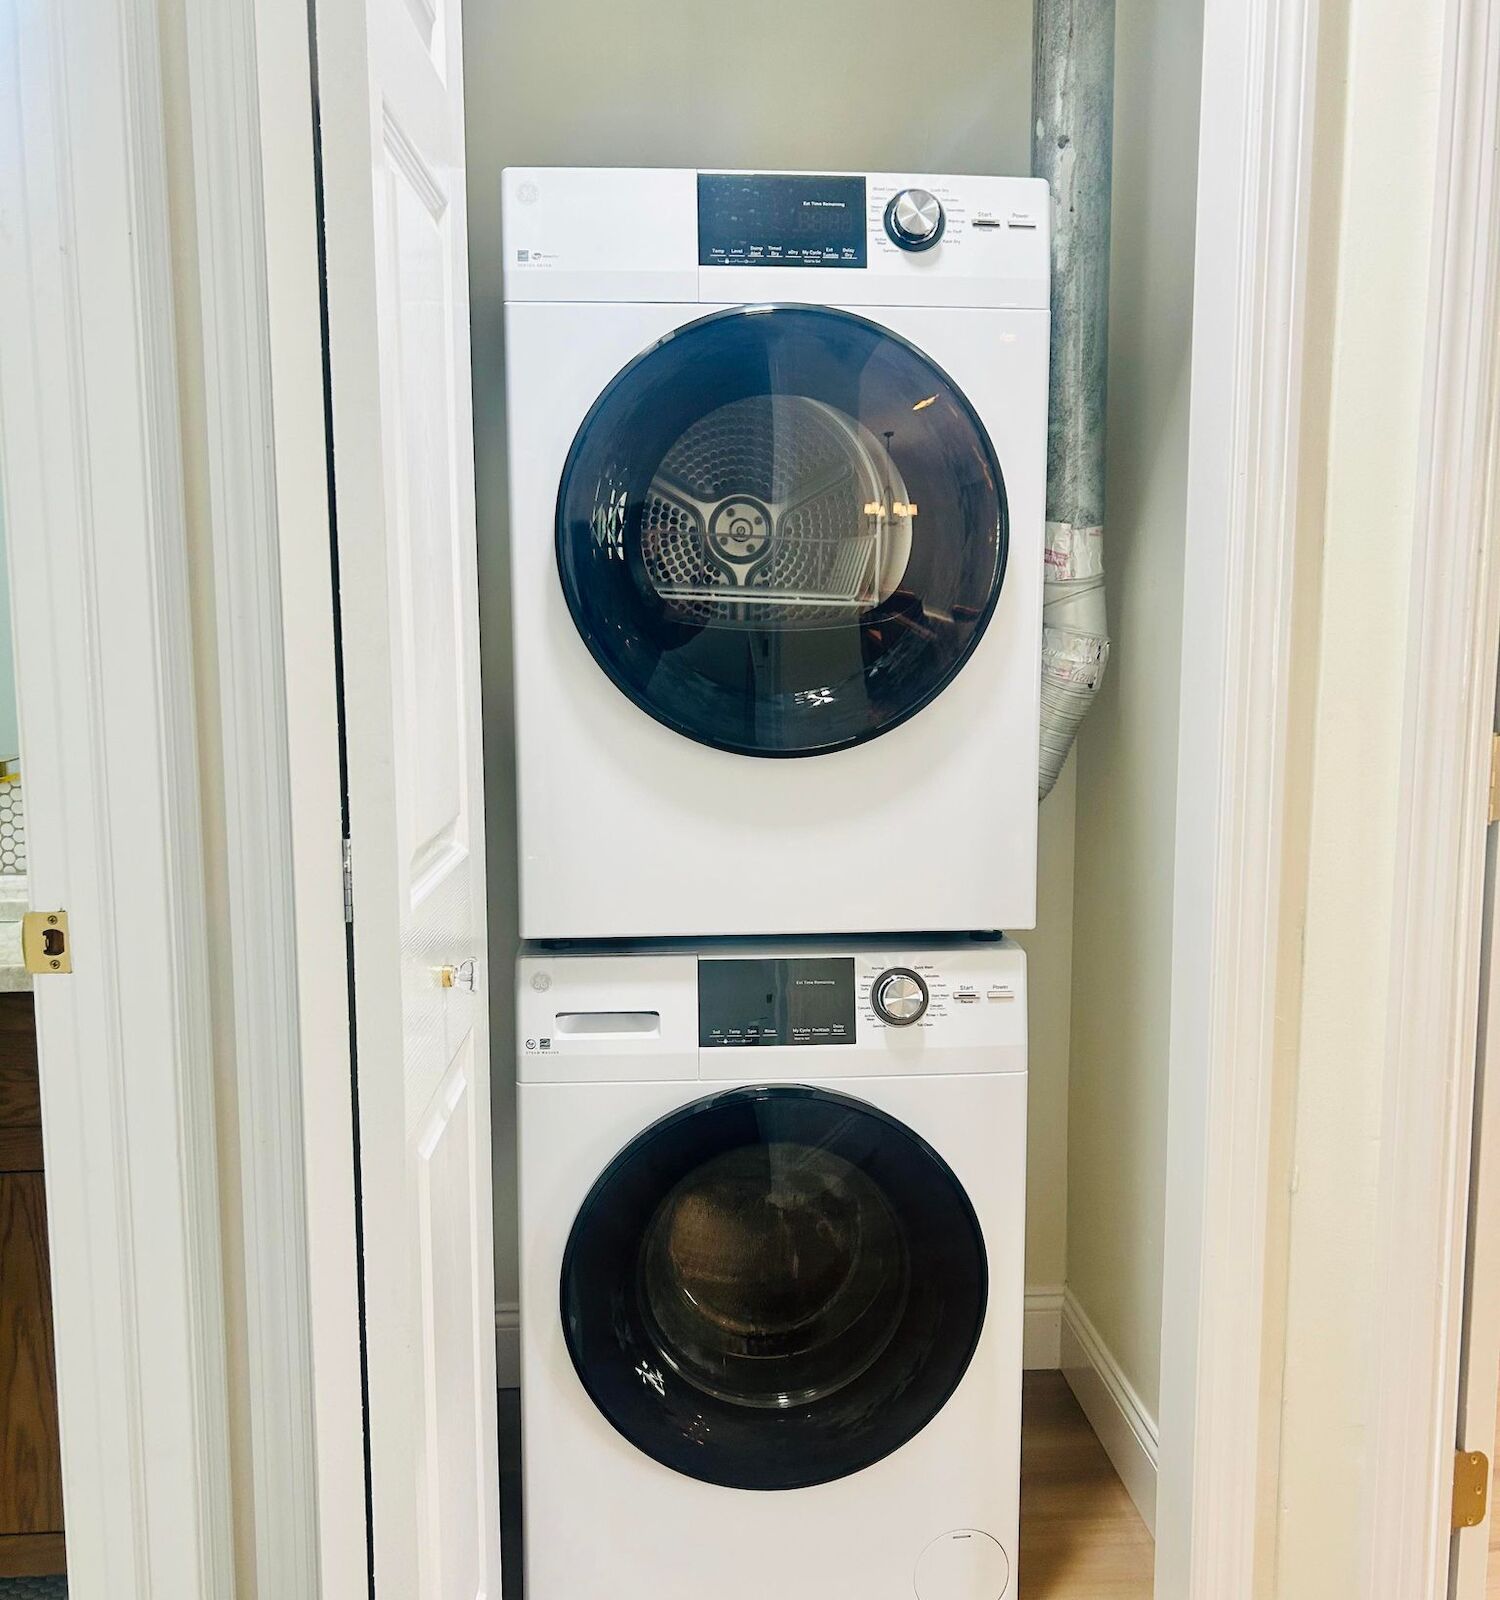 The image shows a stacked washer and dryer set in a small laundry closet with white folding doors and light-colored walls.